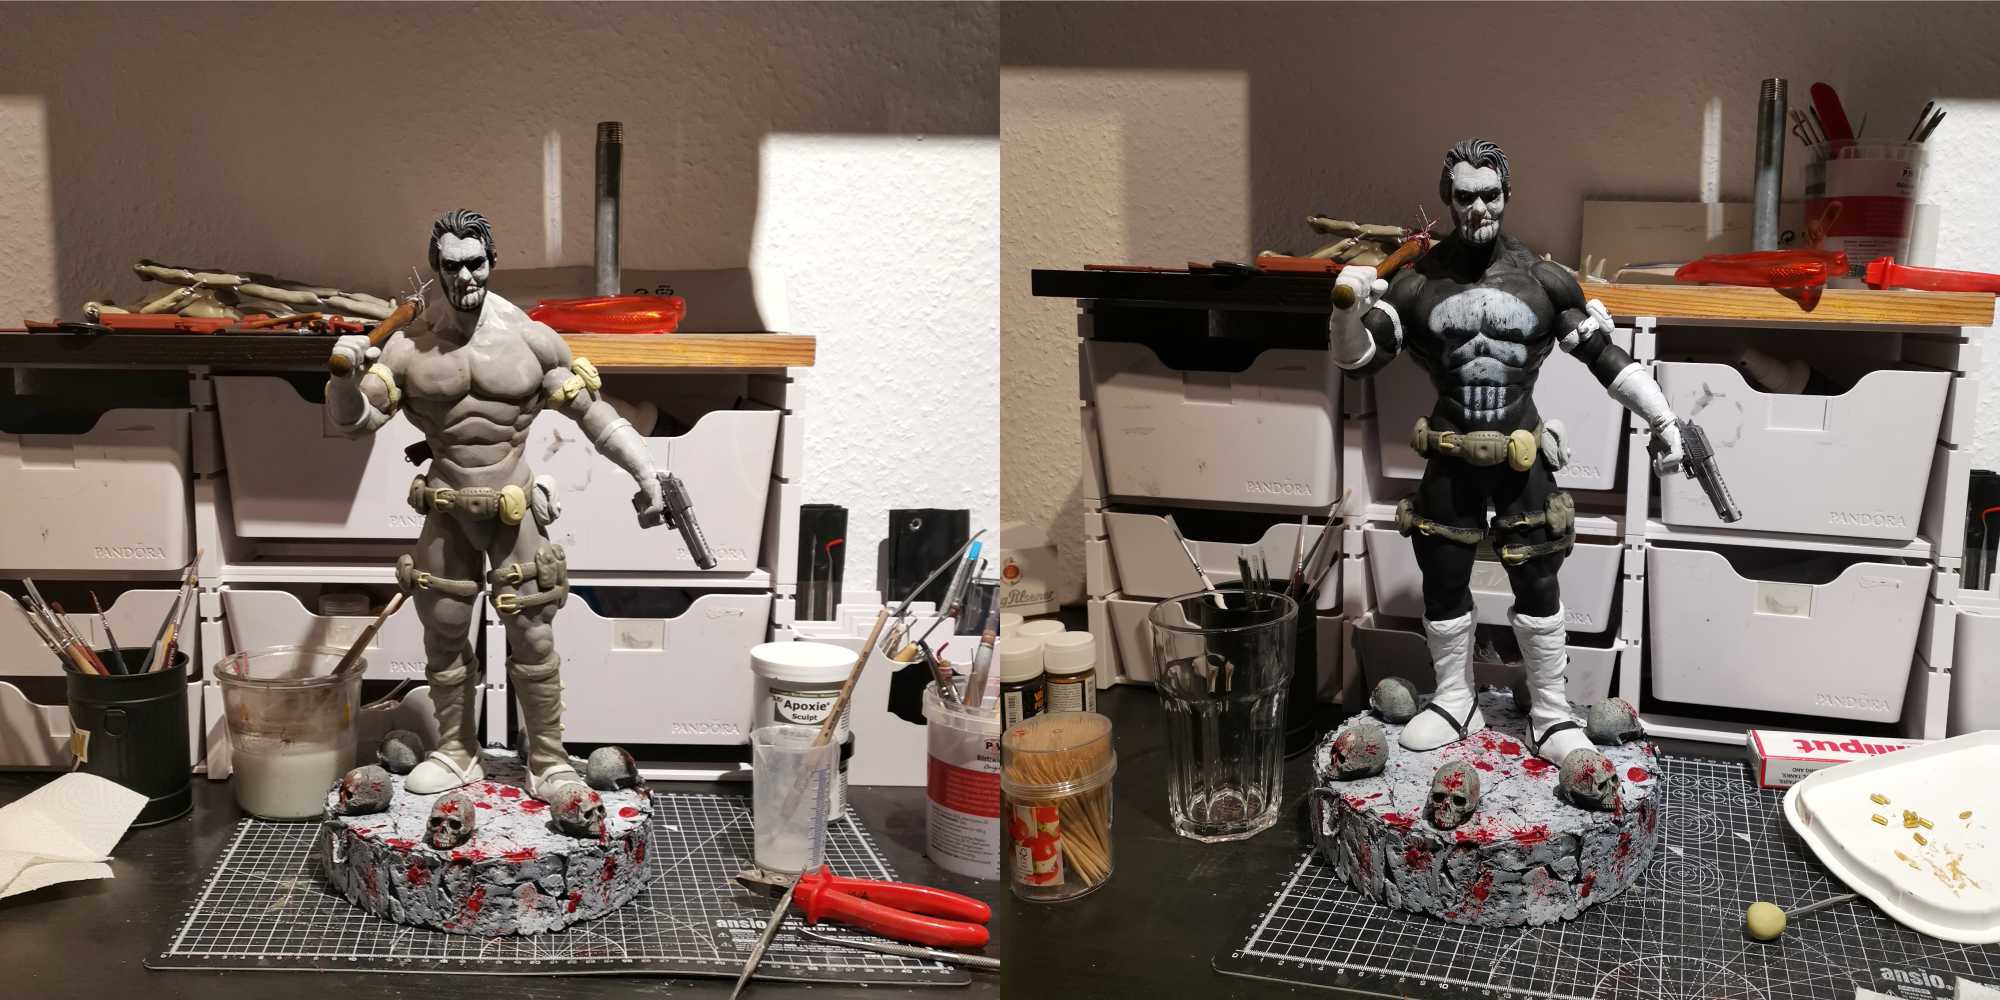 Sculpting The Punisher - Bemalung mit Acrylfarben